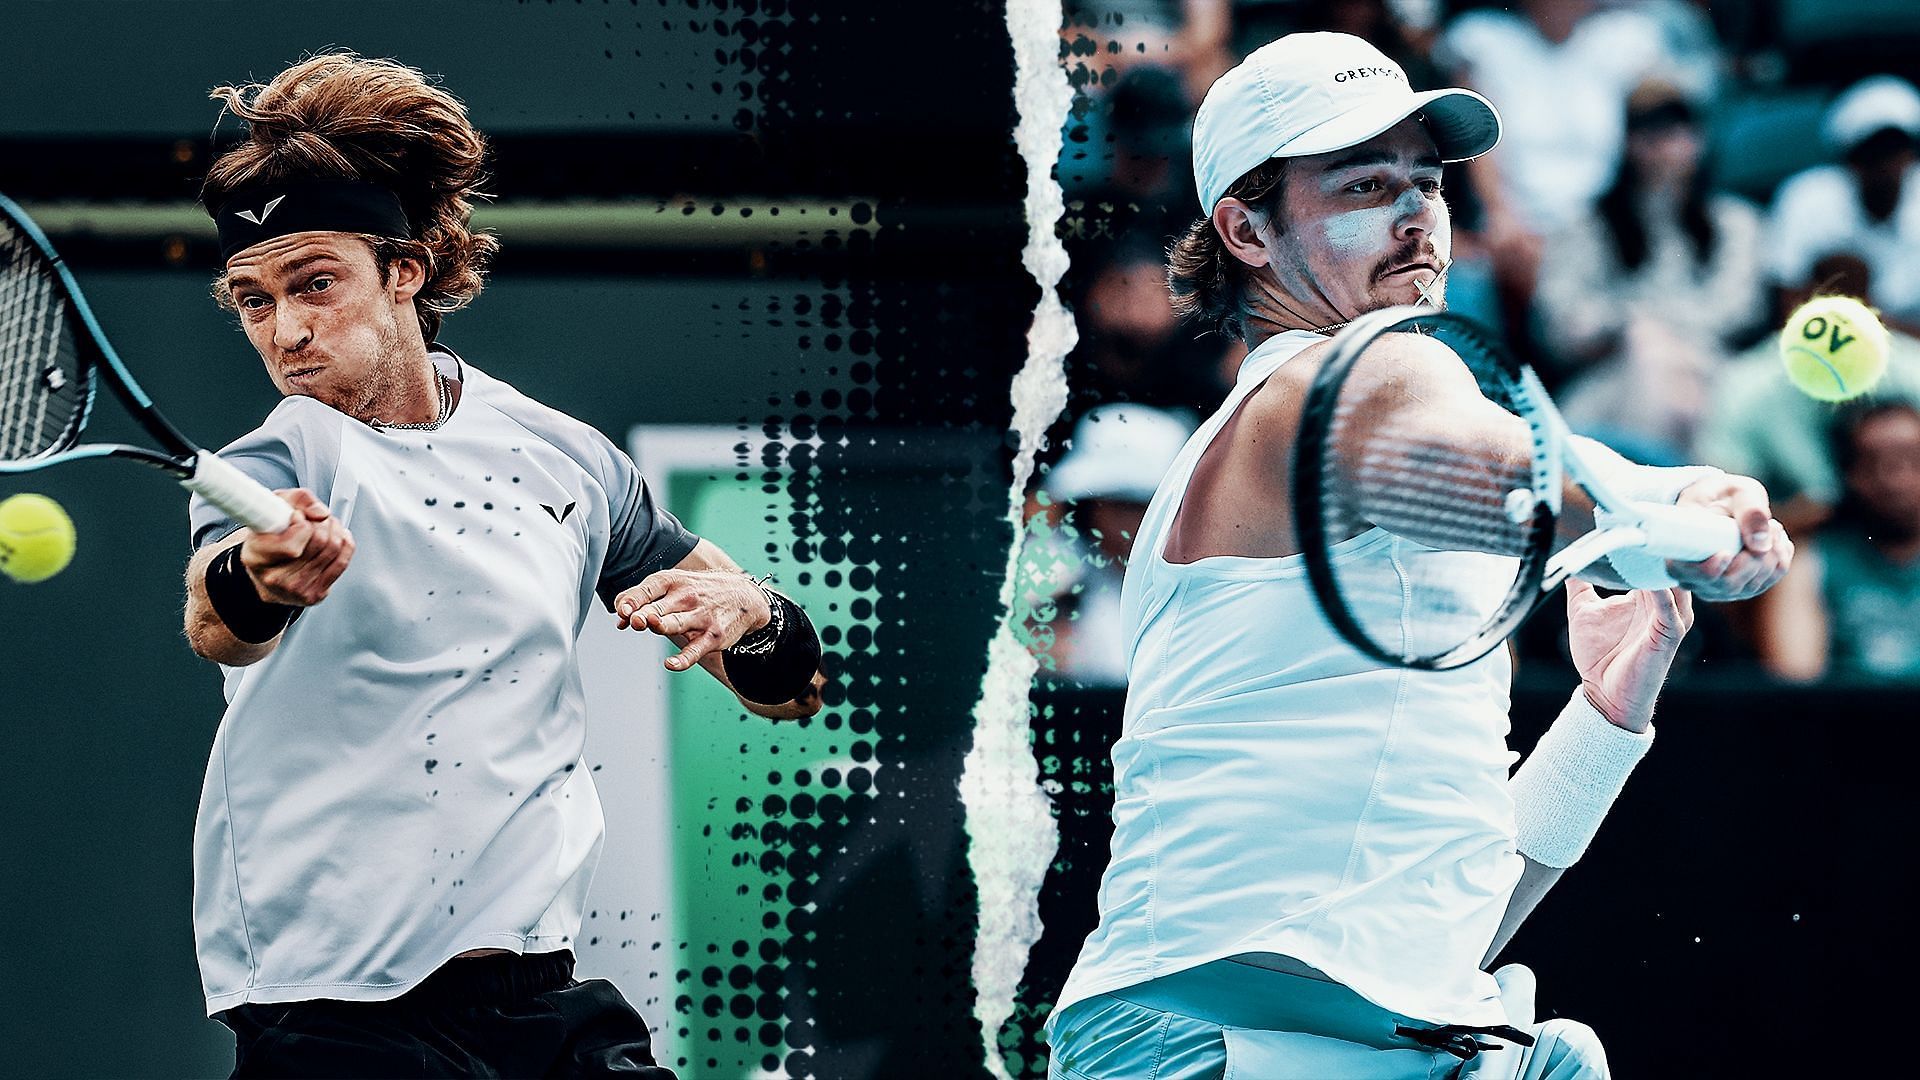 Miami Open 2023: Andrey Rublev vs J.J. Wolf preview, head-to-head, prediction, odds and pick